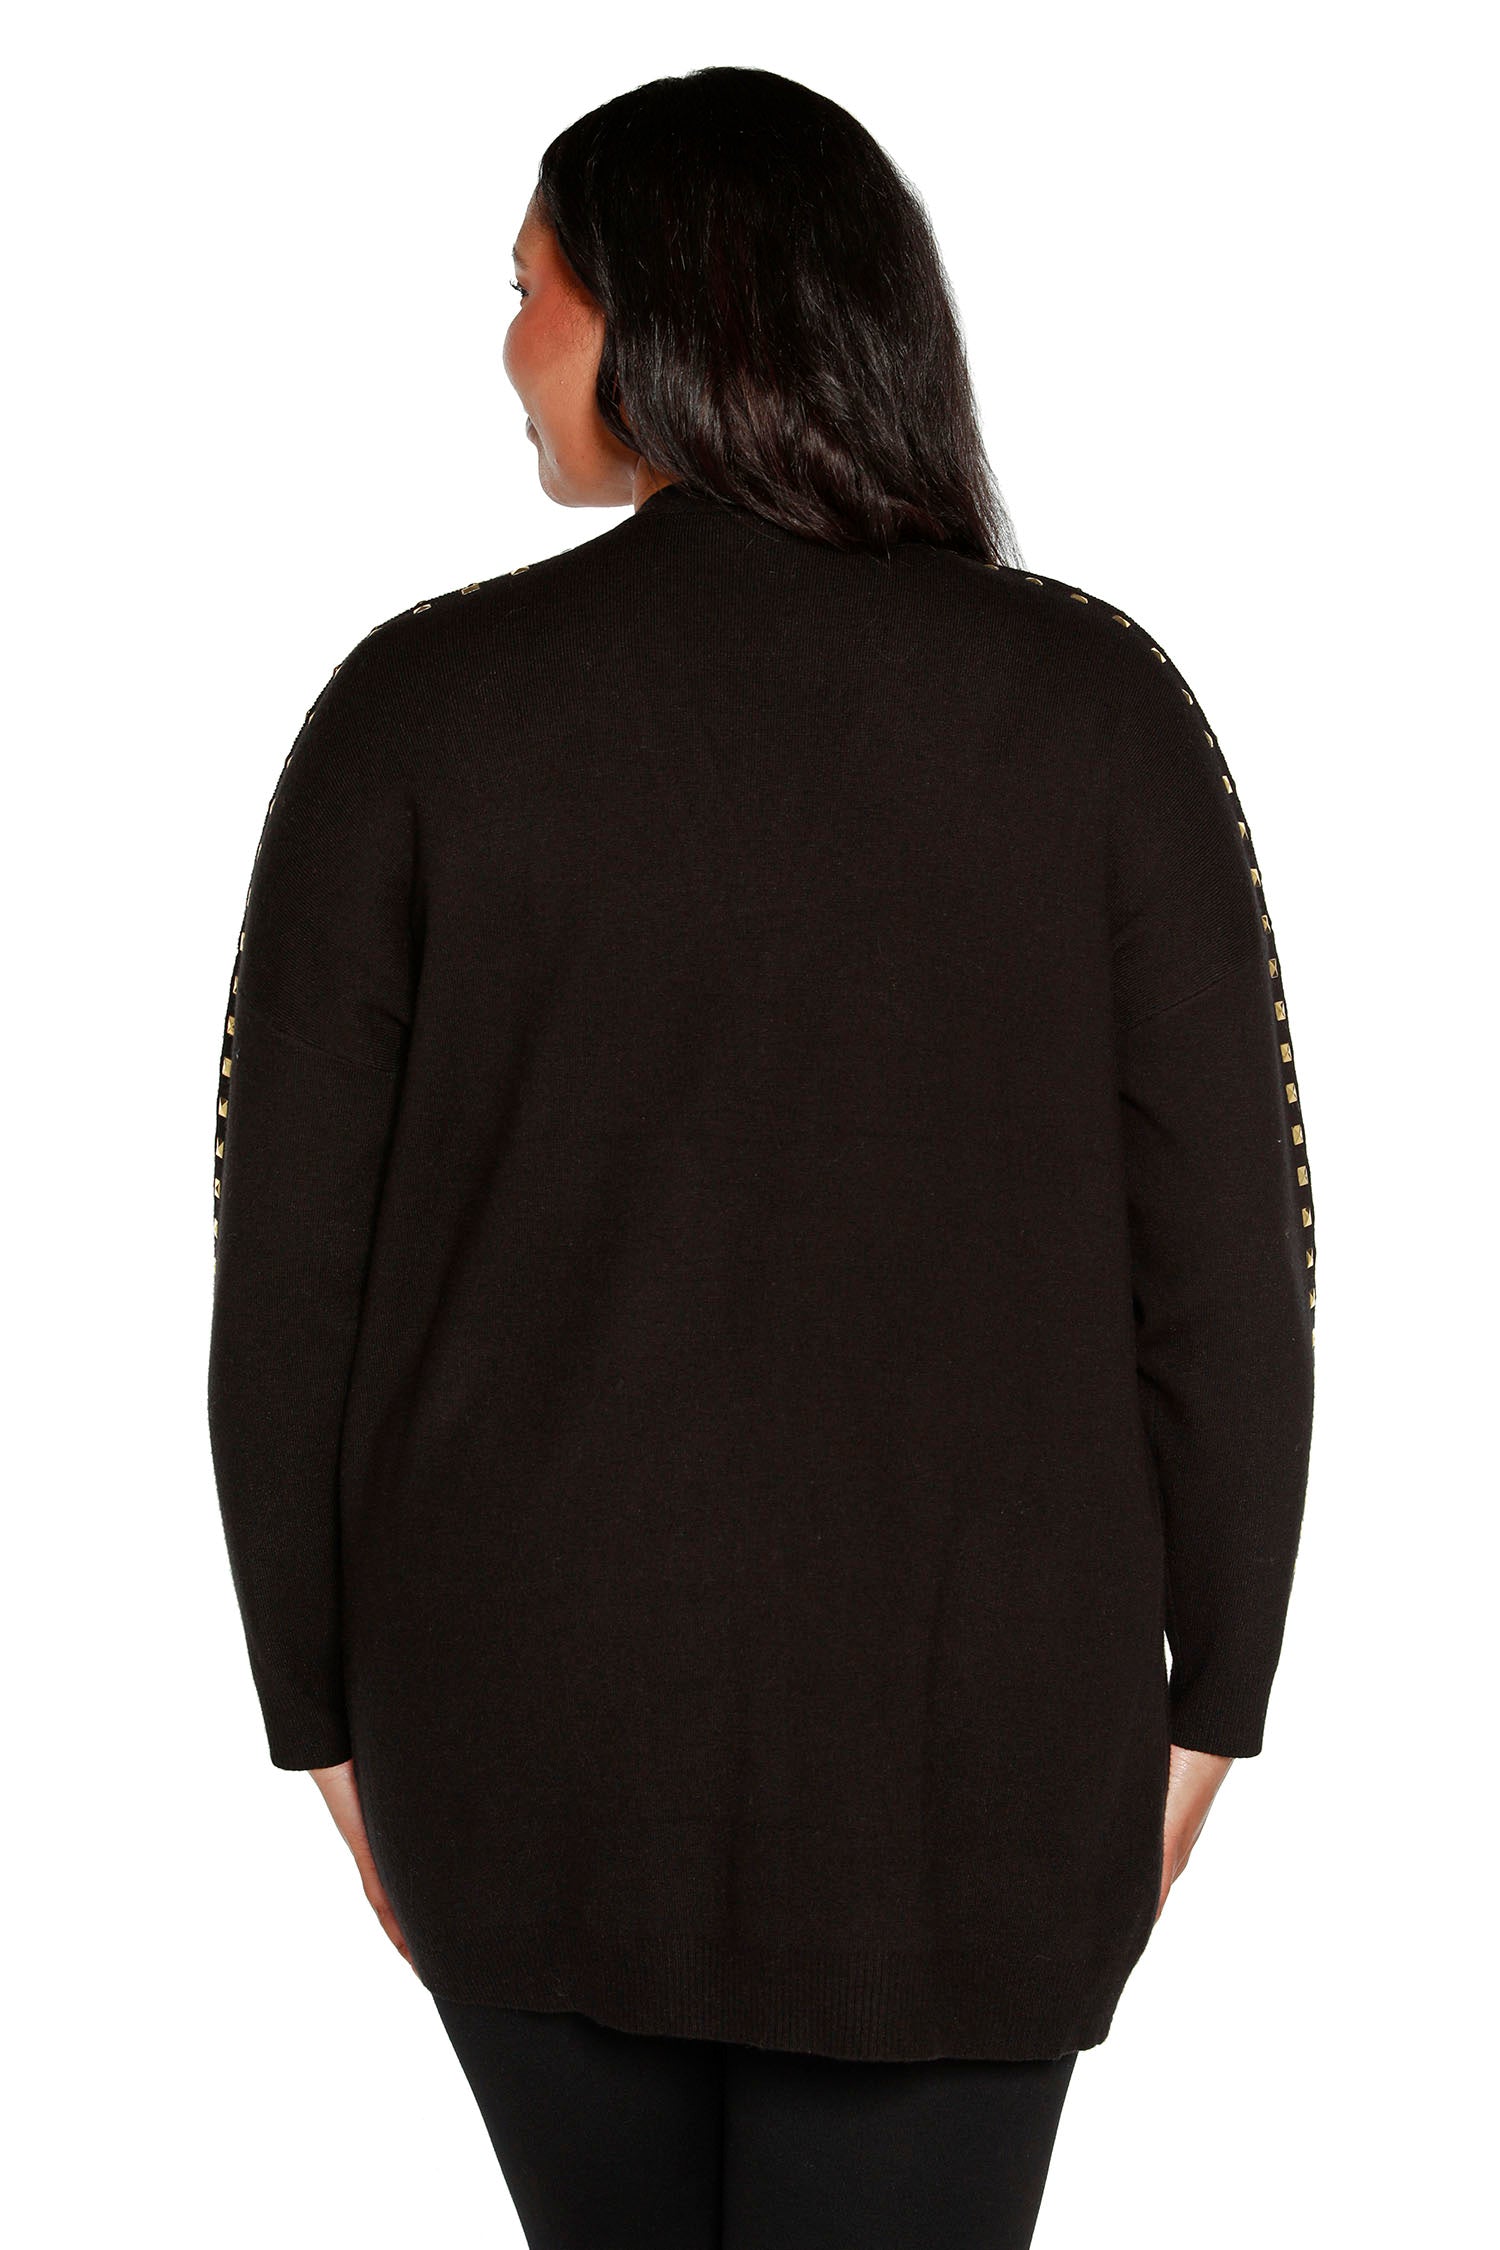 Women’s Lightweight Open Front Cardigan with Rhinestones, Studs and Patch Pockets | Curvy